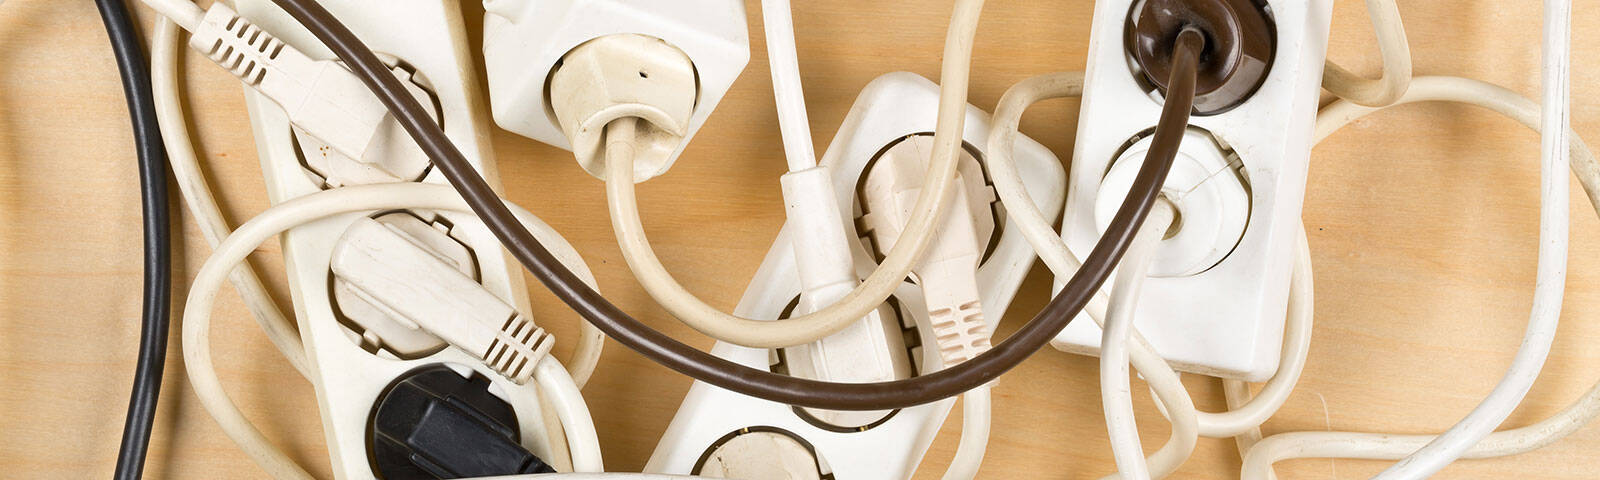 5 ways to manage cables safely in an office